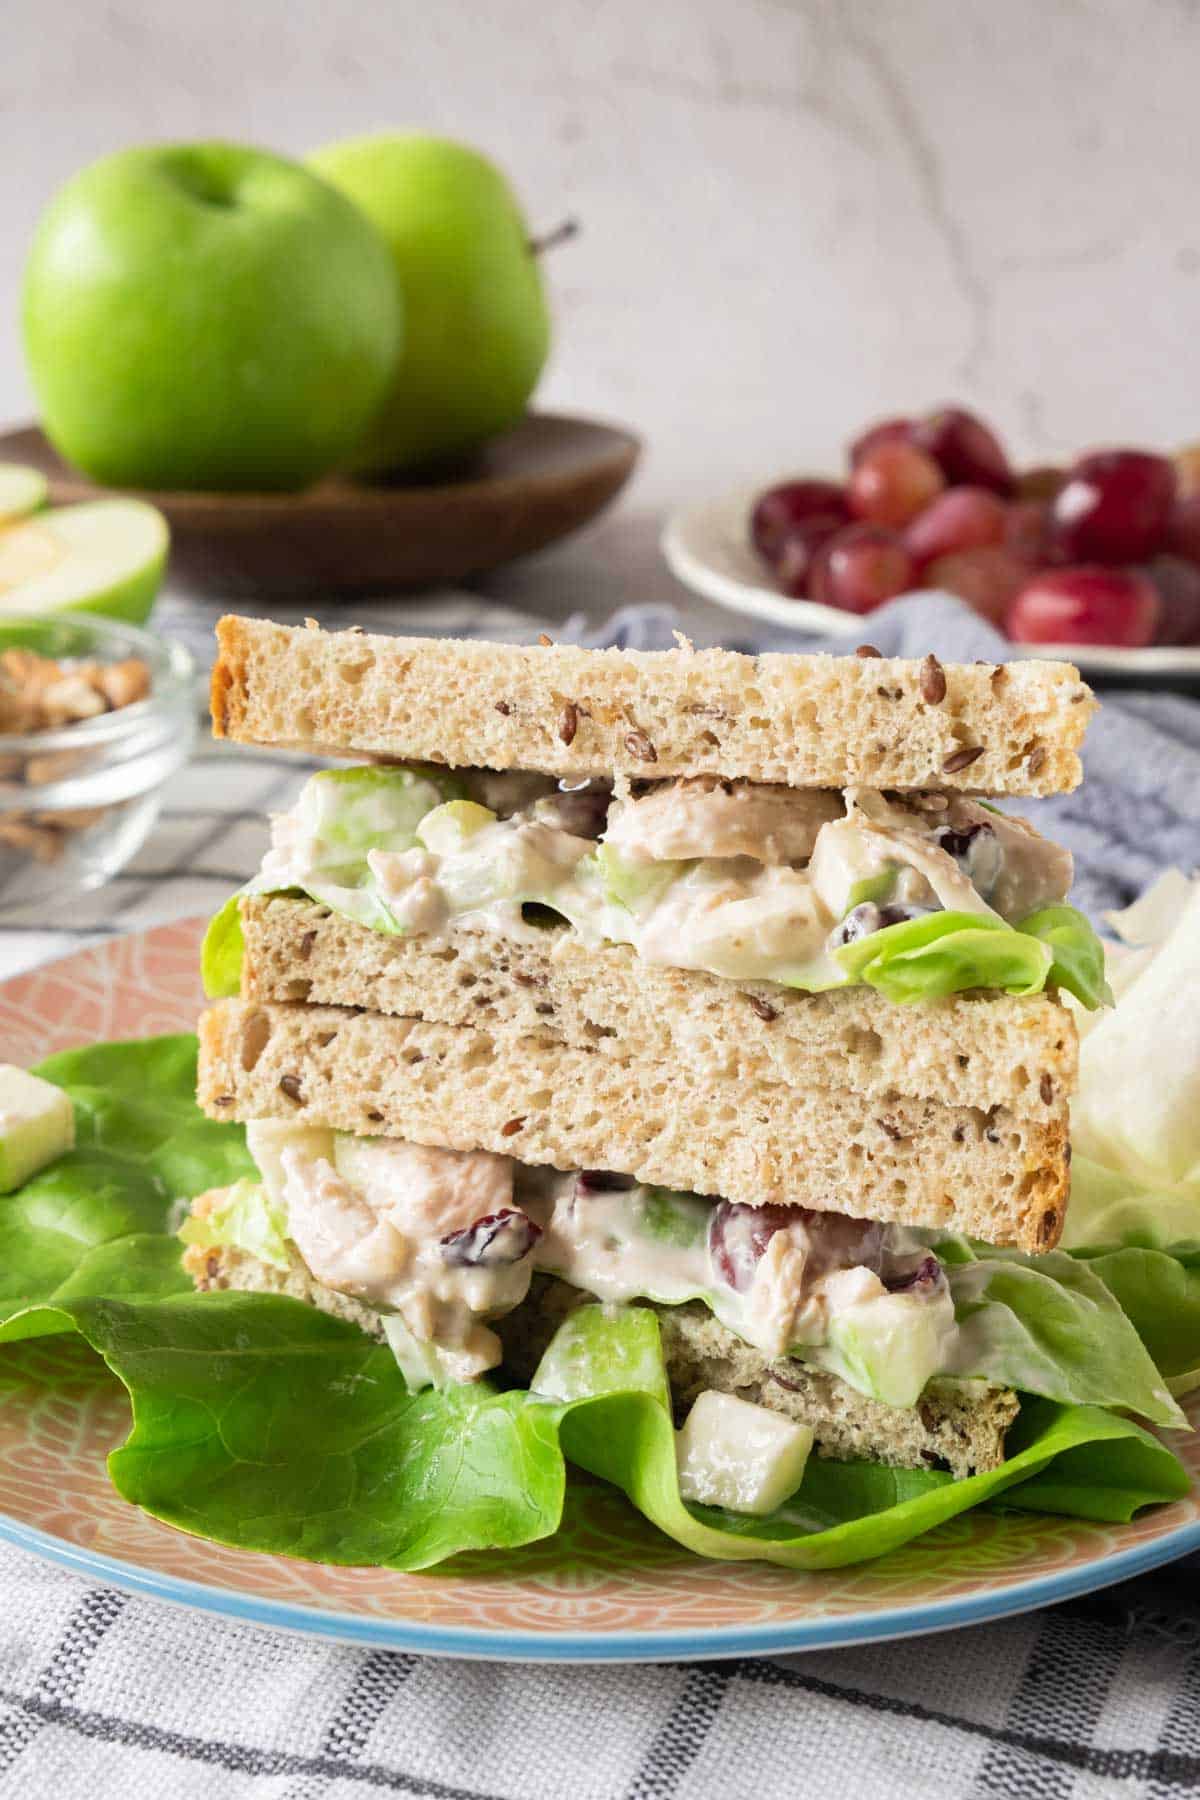 A Waldorf chicken salad sandwich on a plate with apples and grapes.